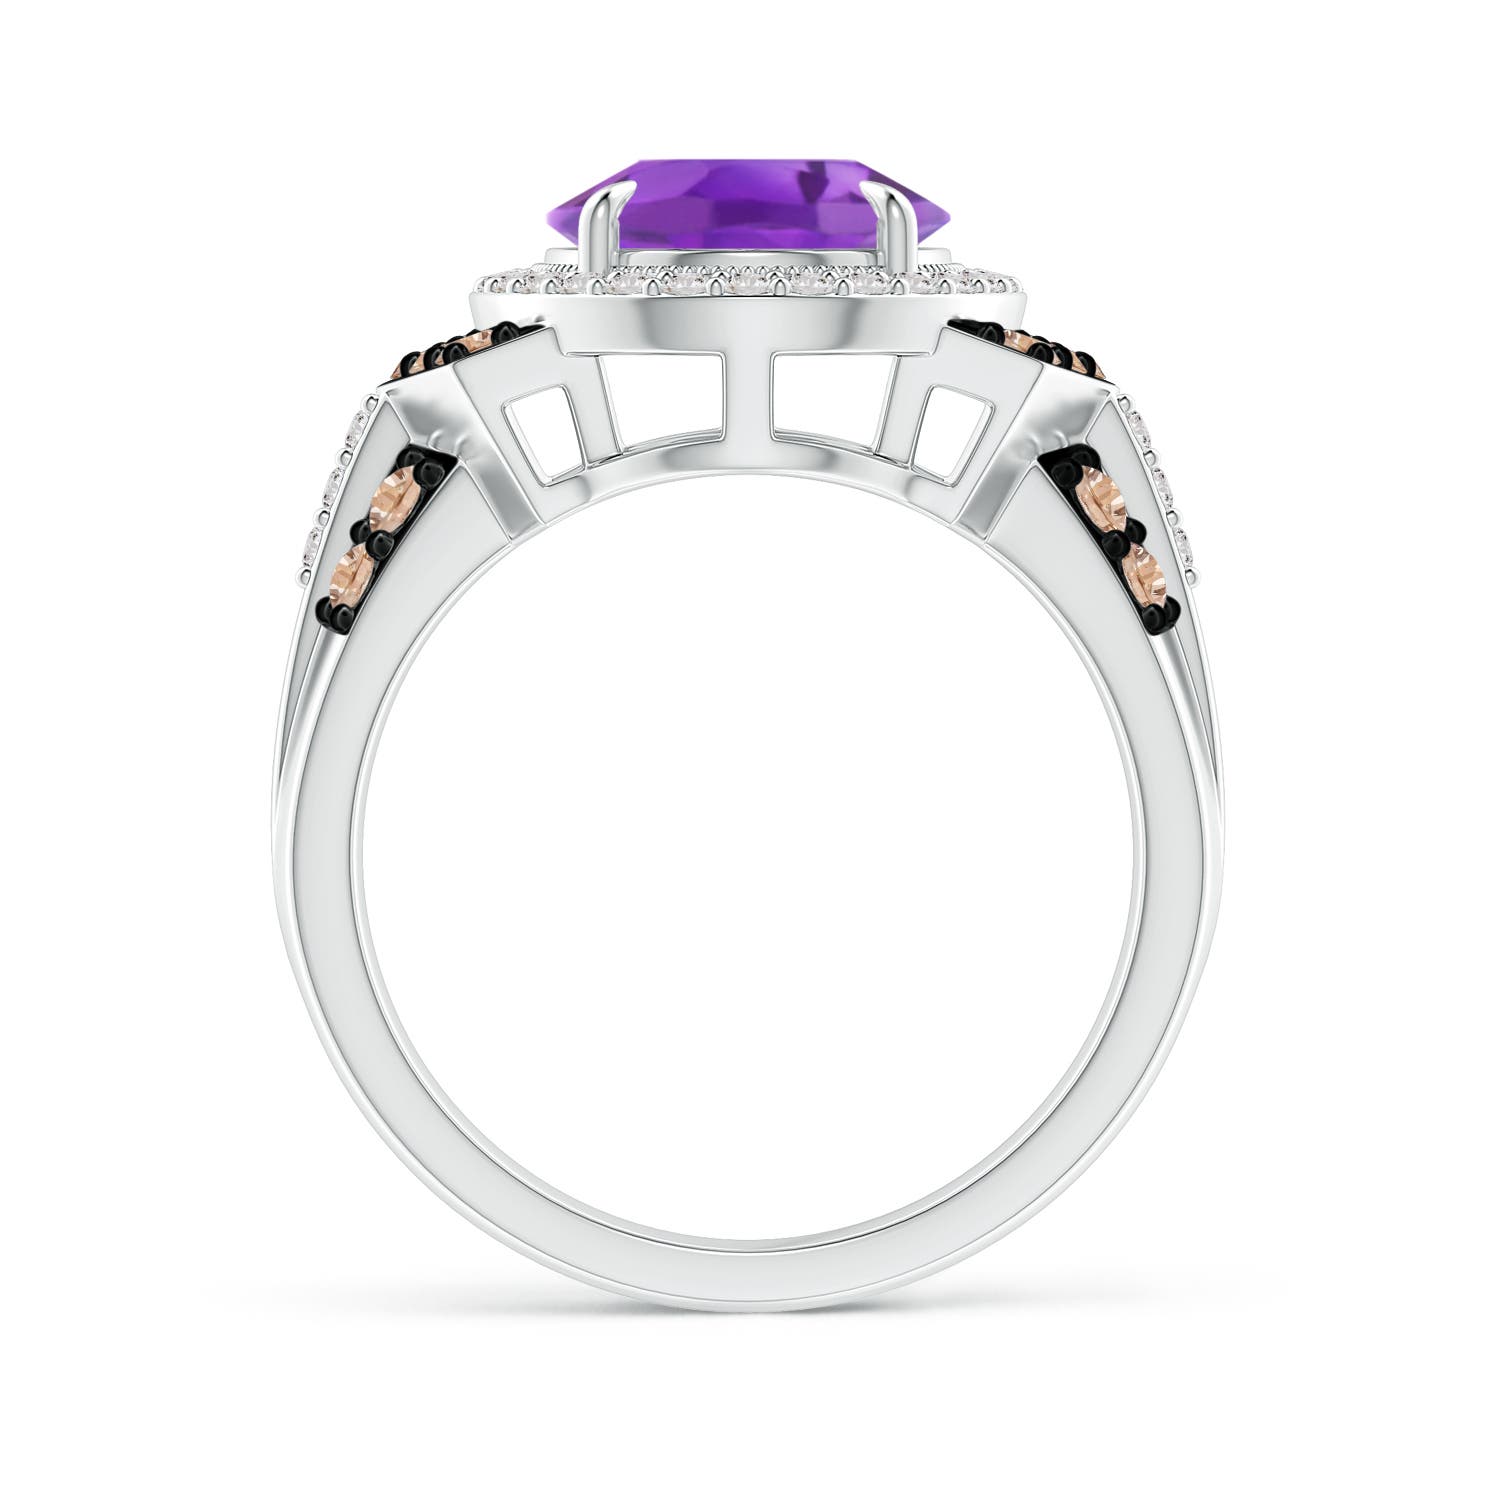 AA - Amethyst / 3.8 CT / 14 KT White Gold